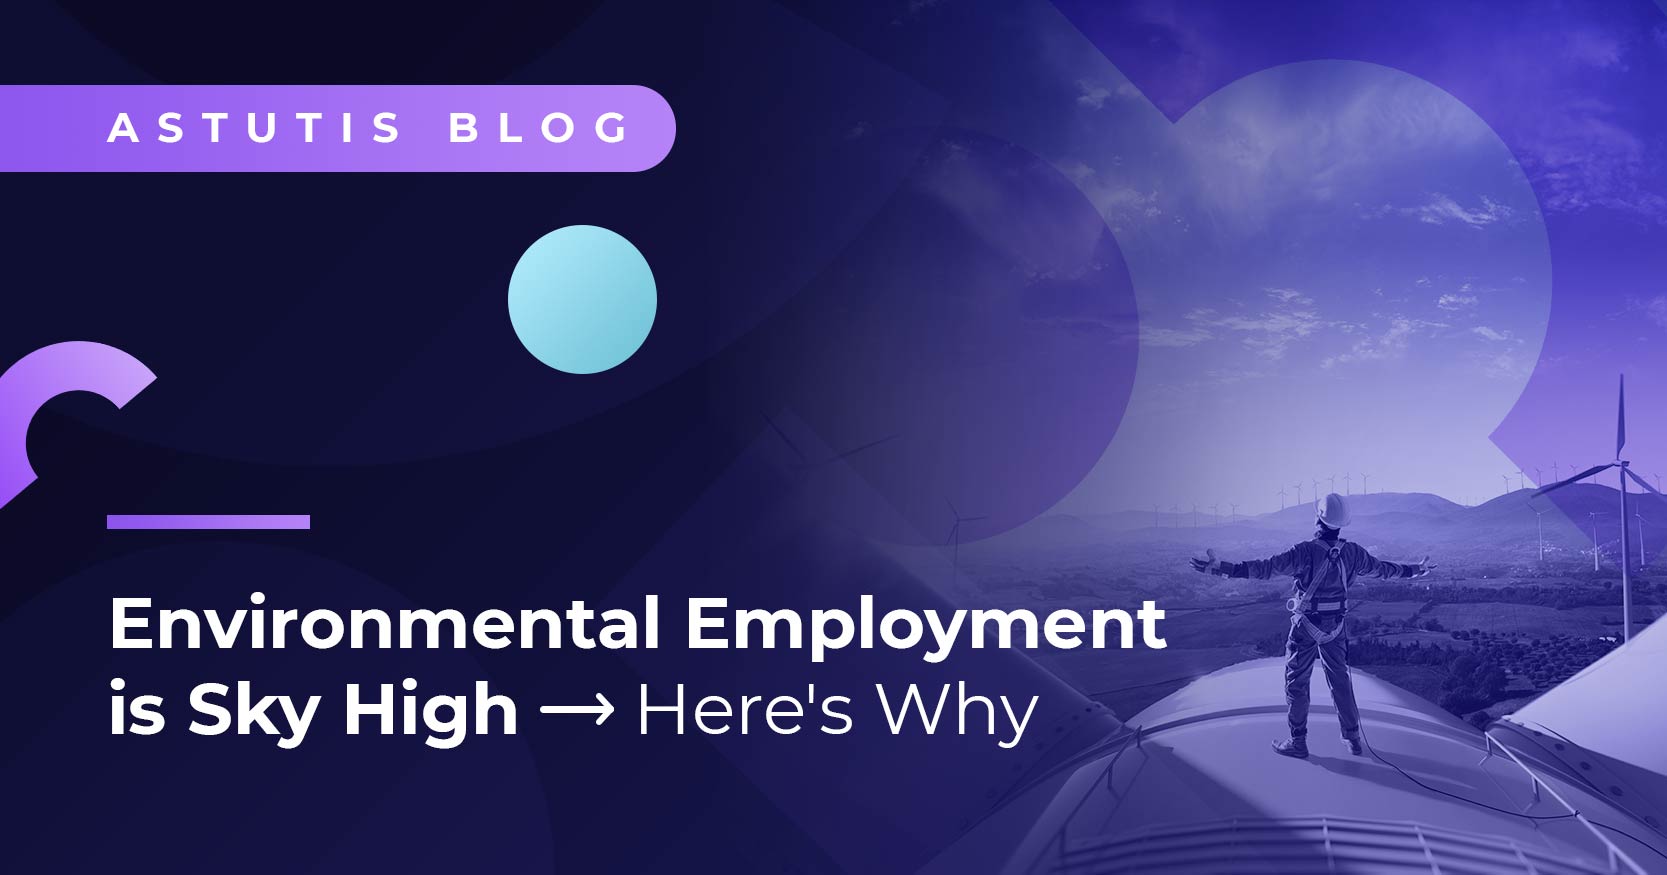 Environmental Employment is Sky High: Here's Why! Image